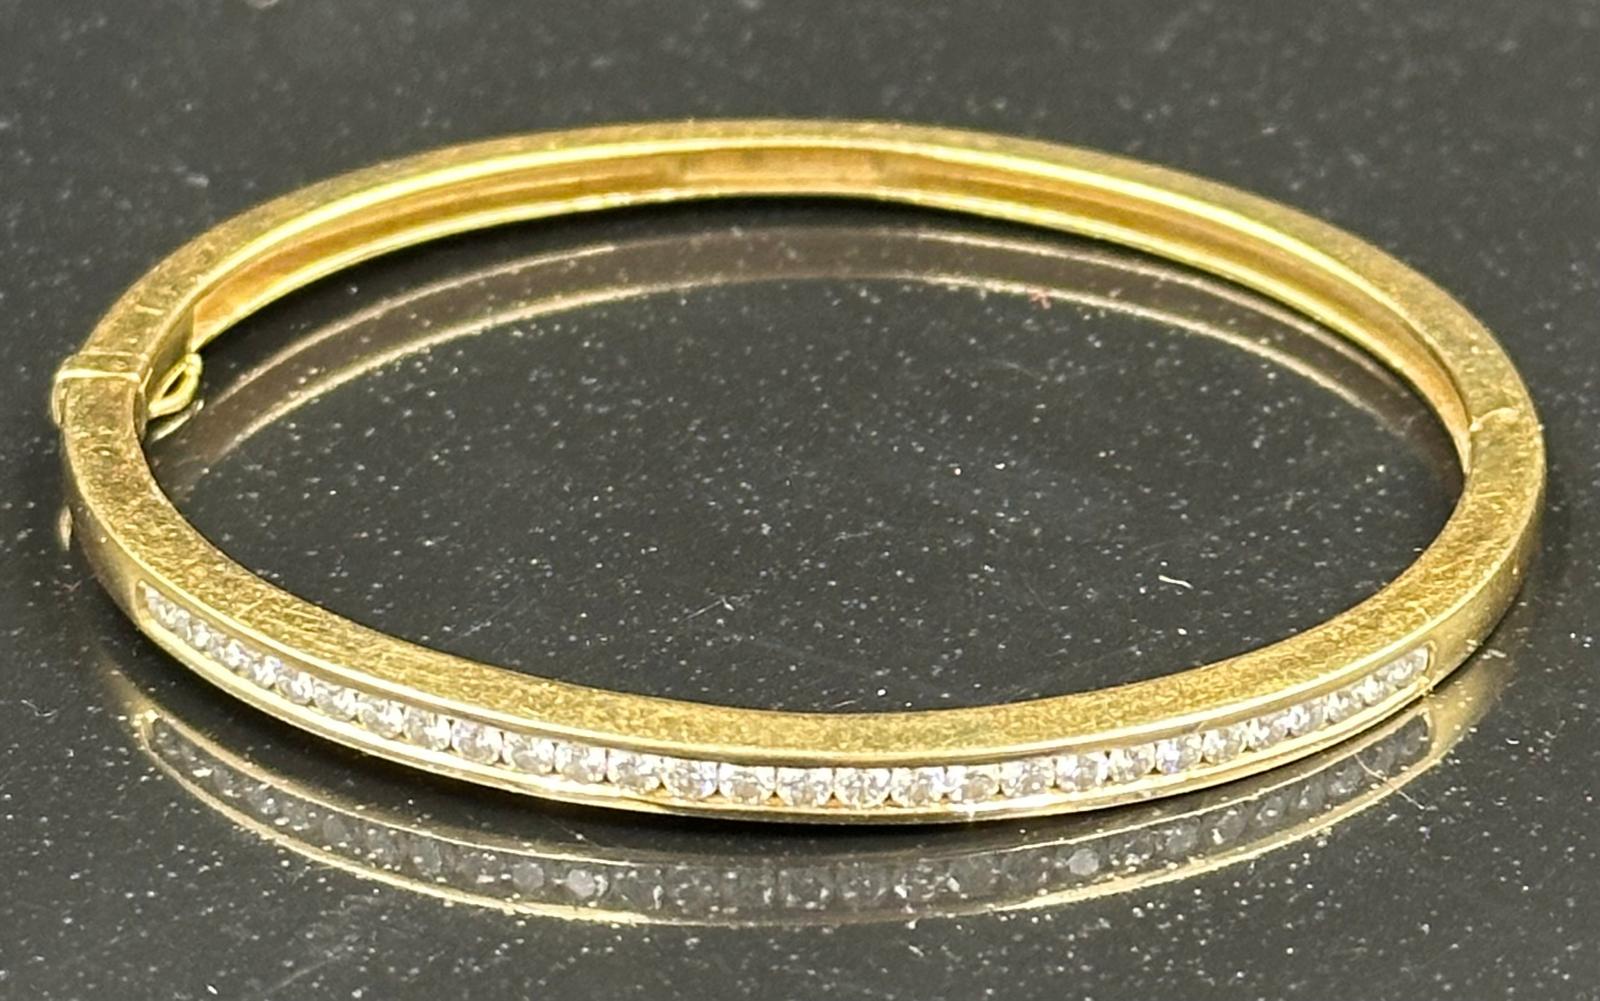 Channel set diamond bangle mounted in 18ct gold. Signed Tiffany & Co. Total diamond weight